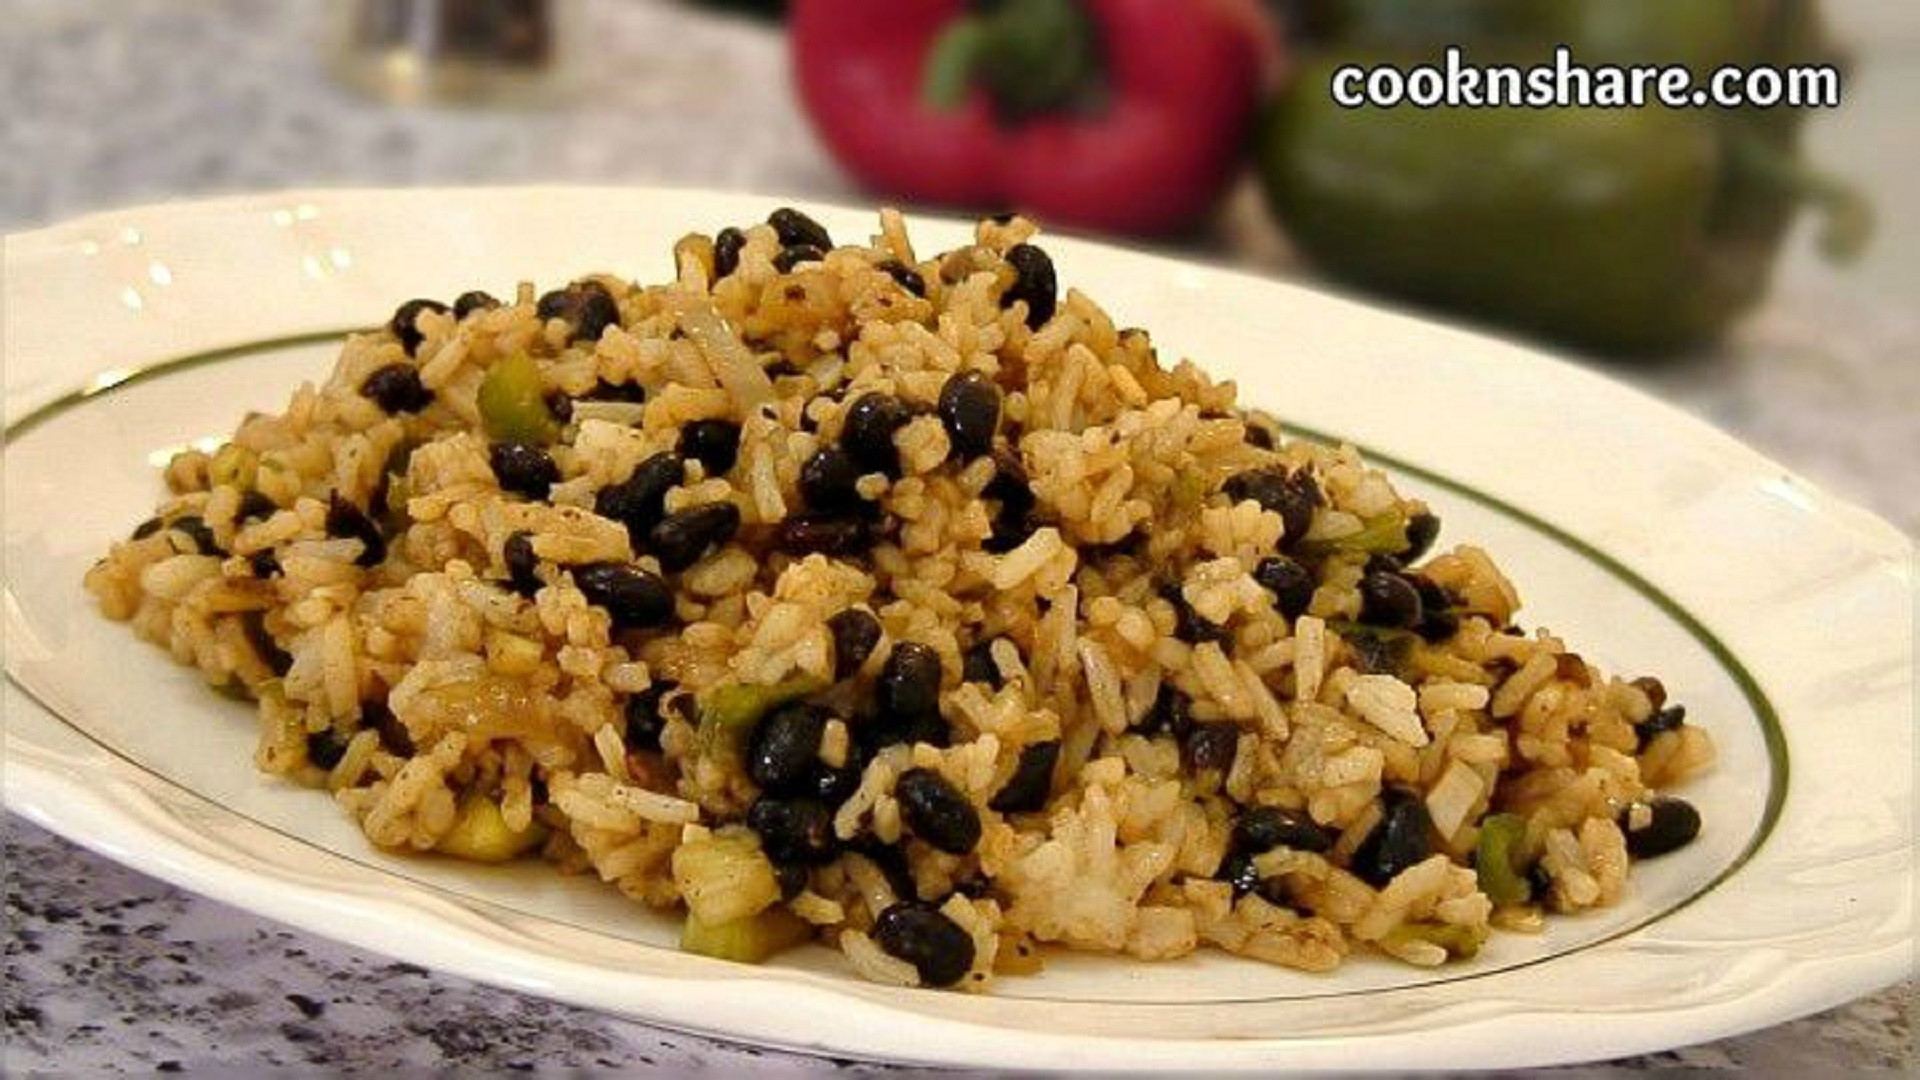 Costa Rican Rice And Beans
 Gallo Pinto Costa Rican Black Beans and Rice